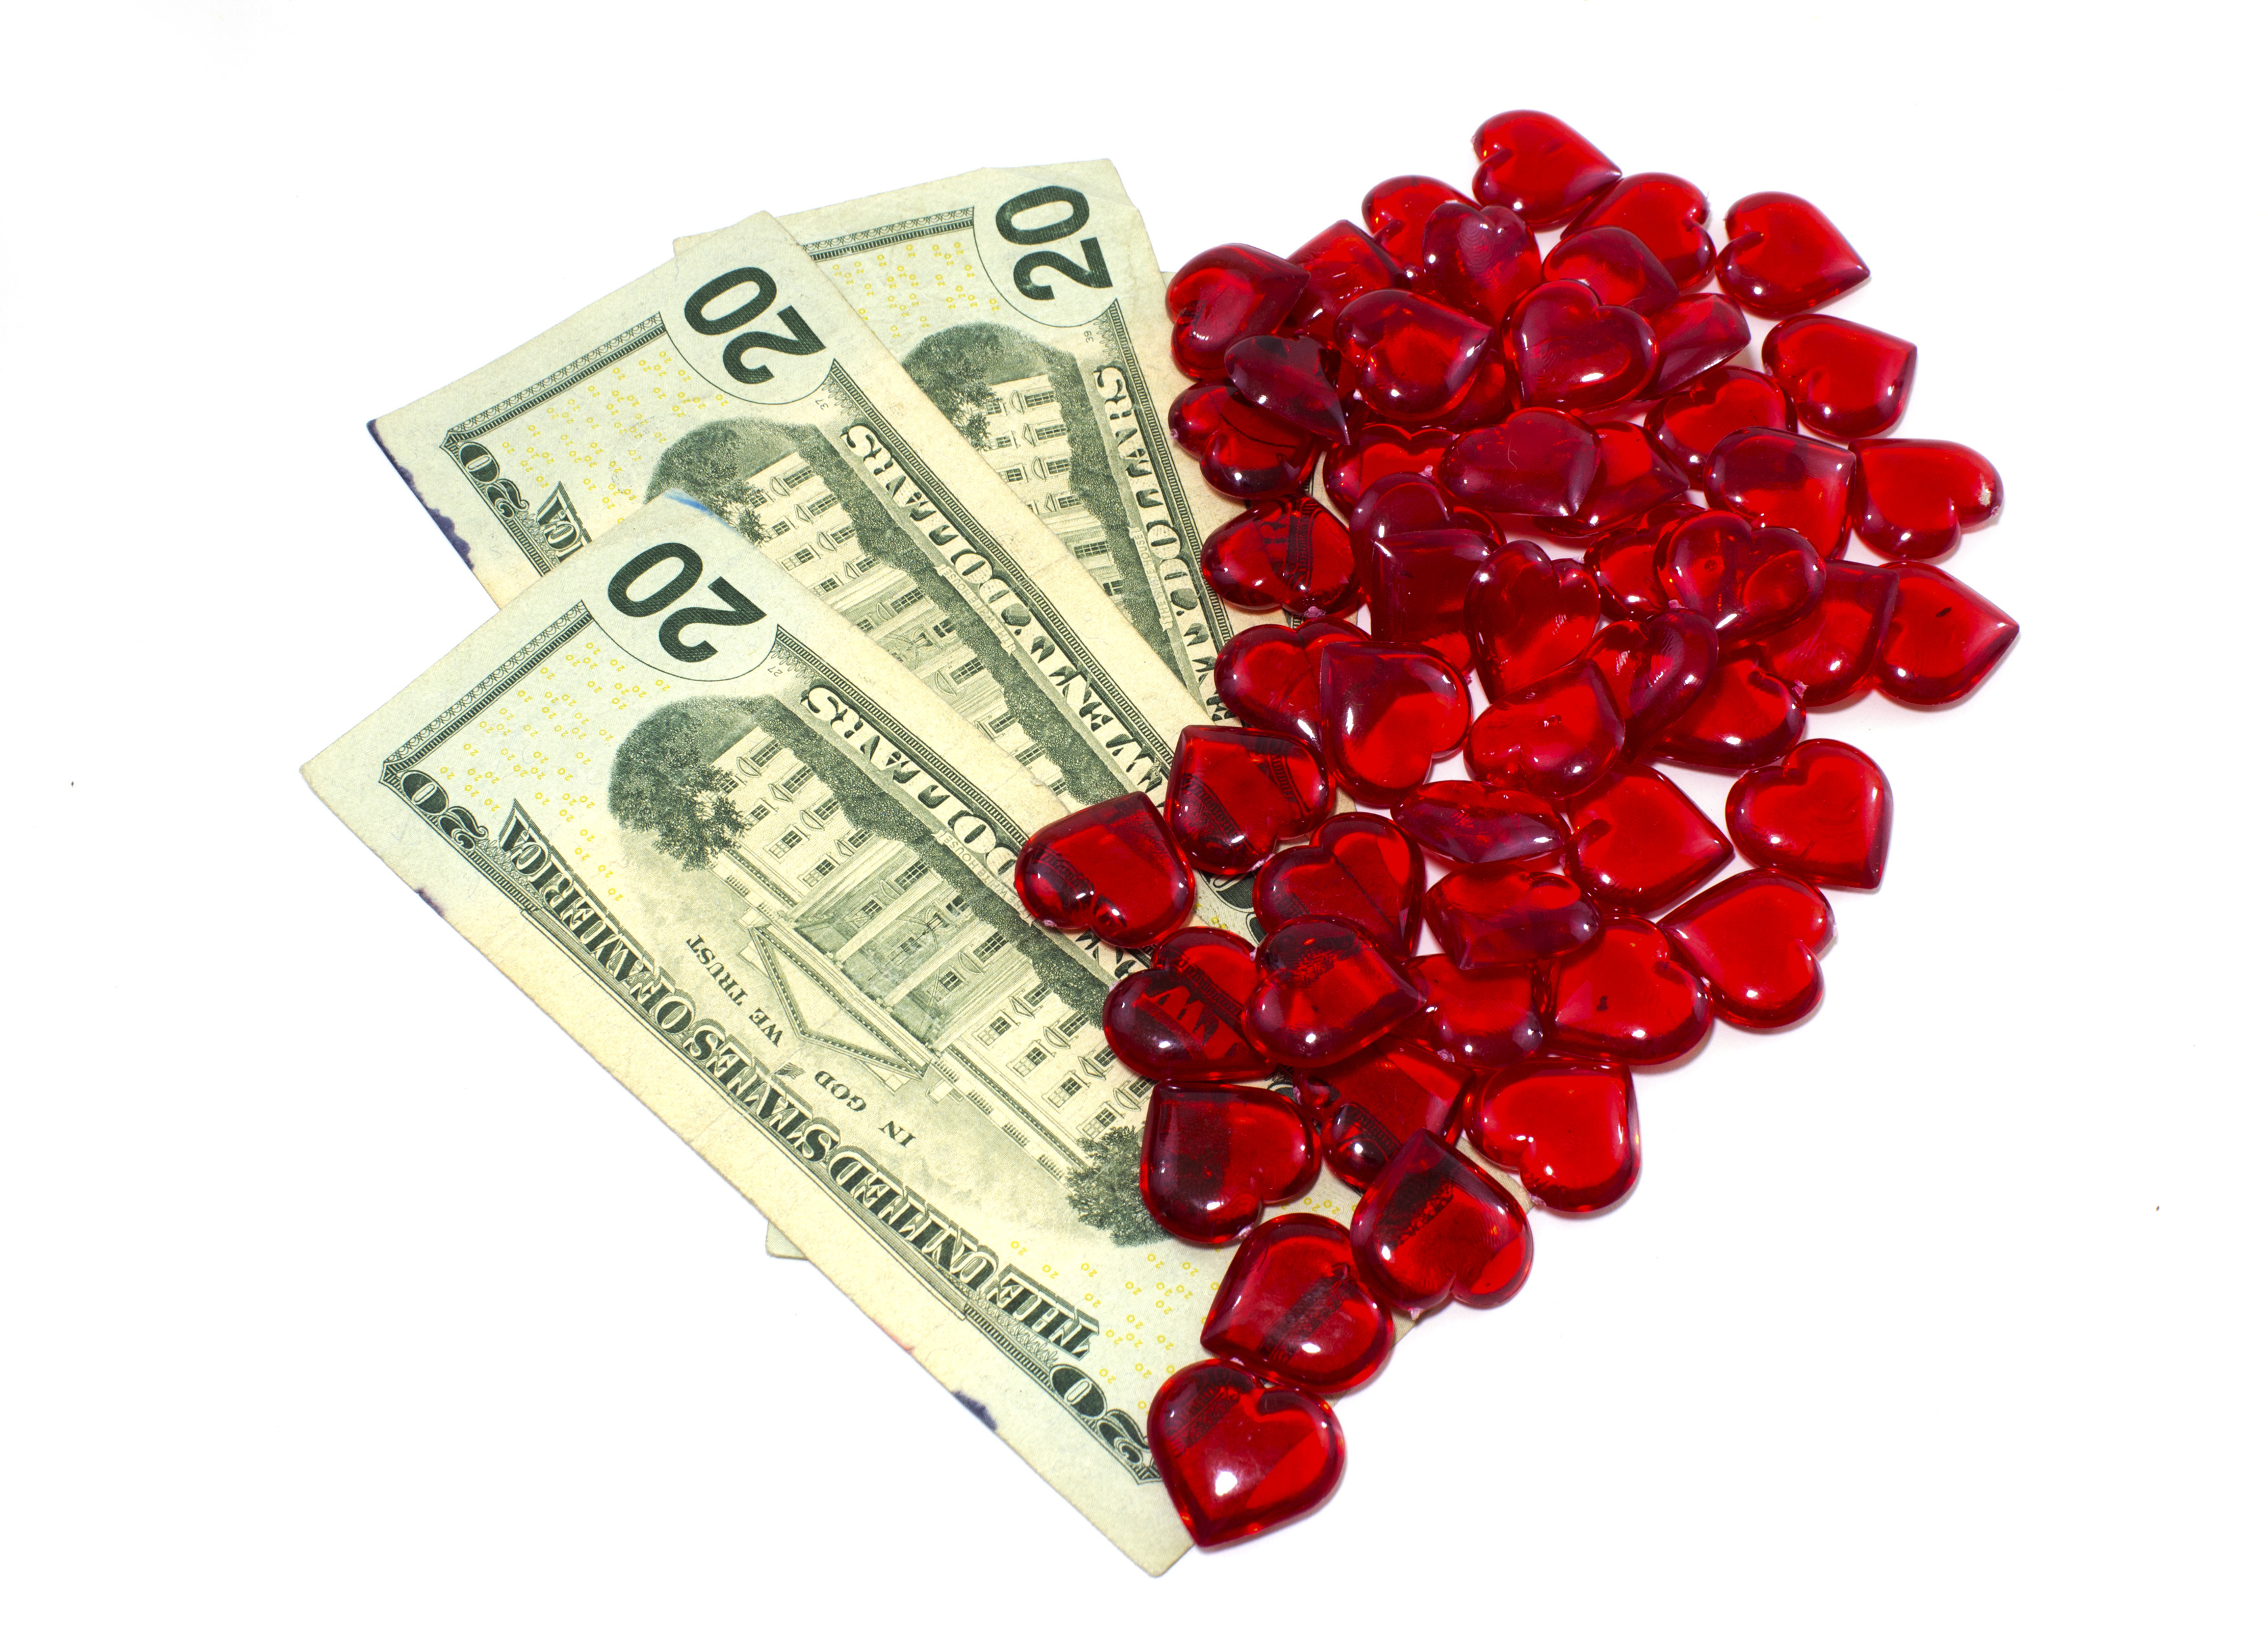 hearts-and-money-1113tm-bkgd-306.jpg (3460×2517)